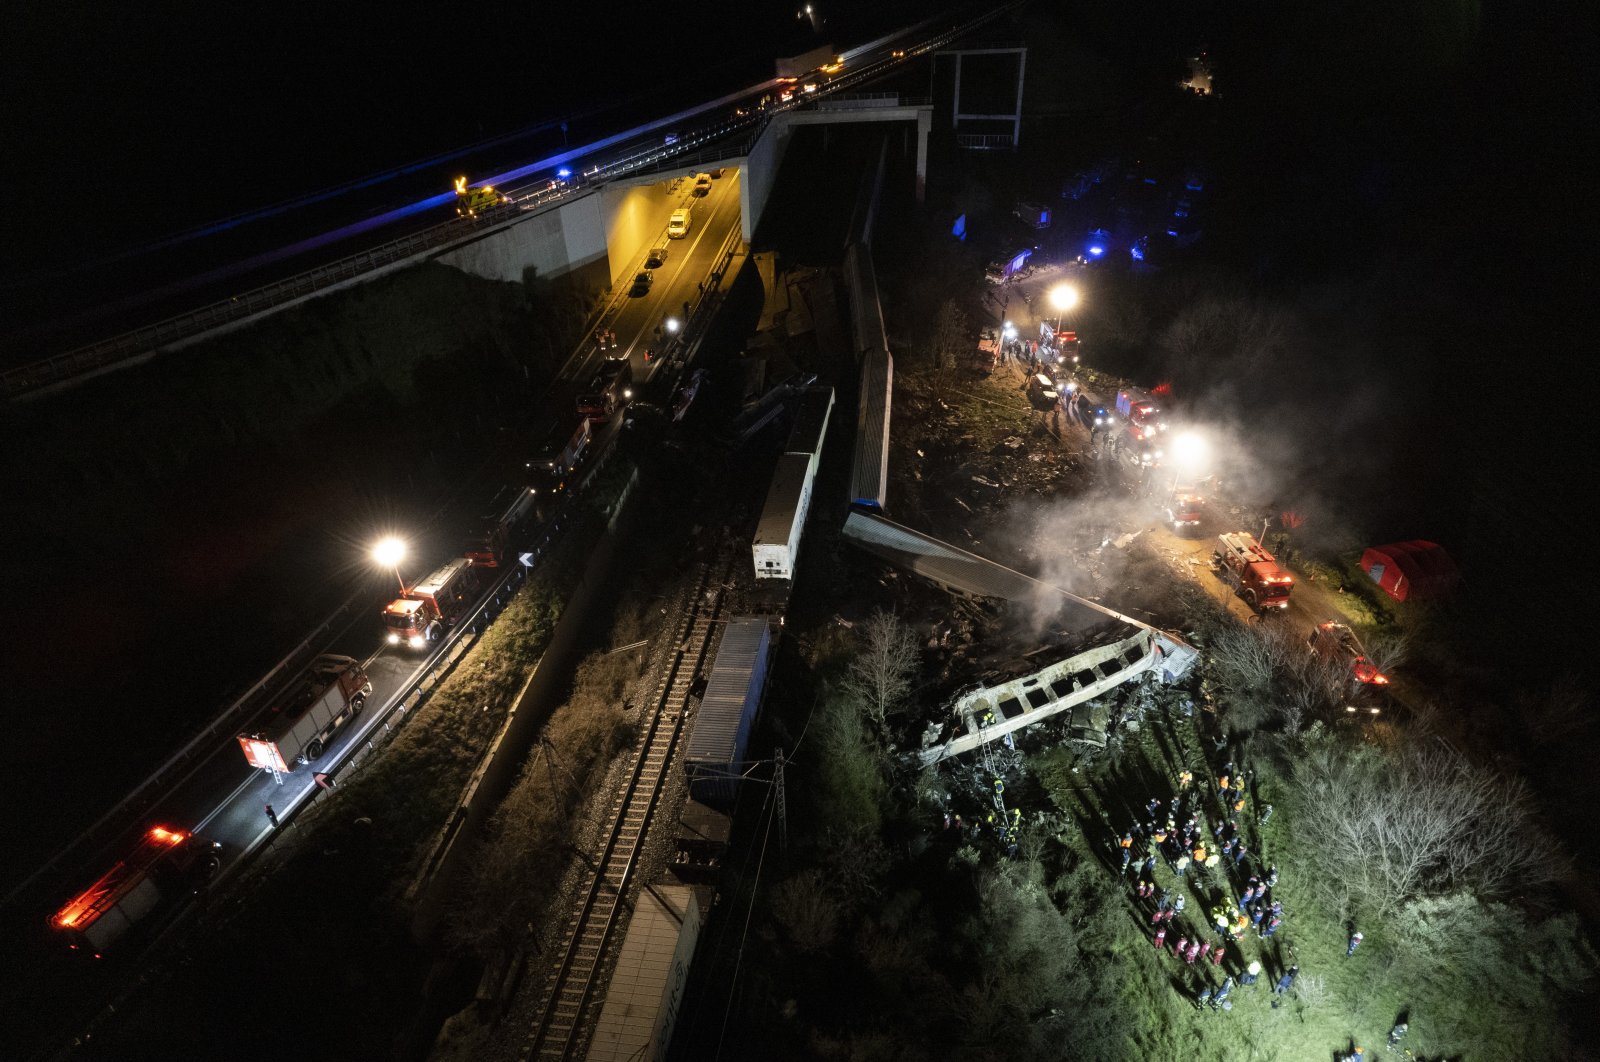 Firefighters and rescue crews working to extricate passengers from trains after a collision near Larissa, Greece, March 1, 2023. (EPA Photo)